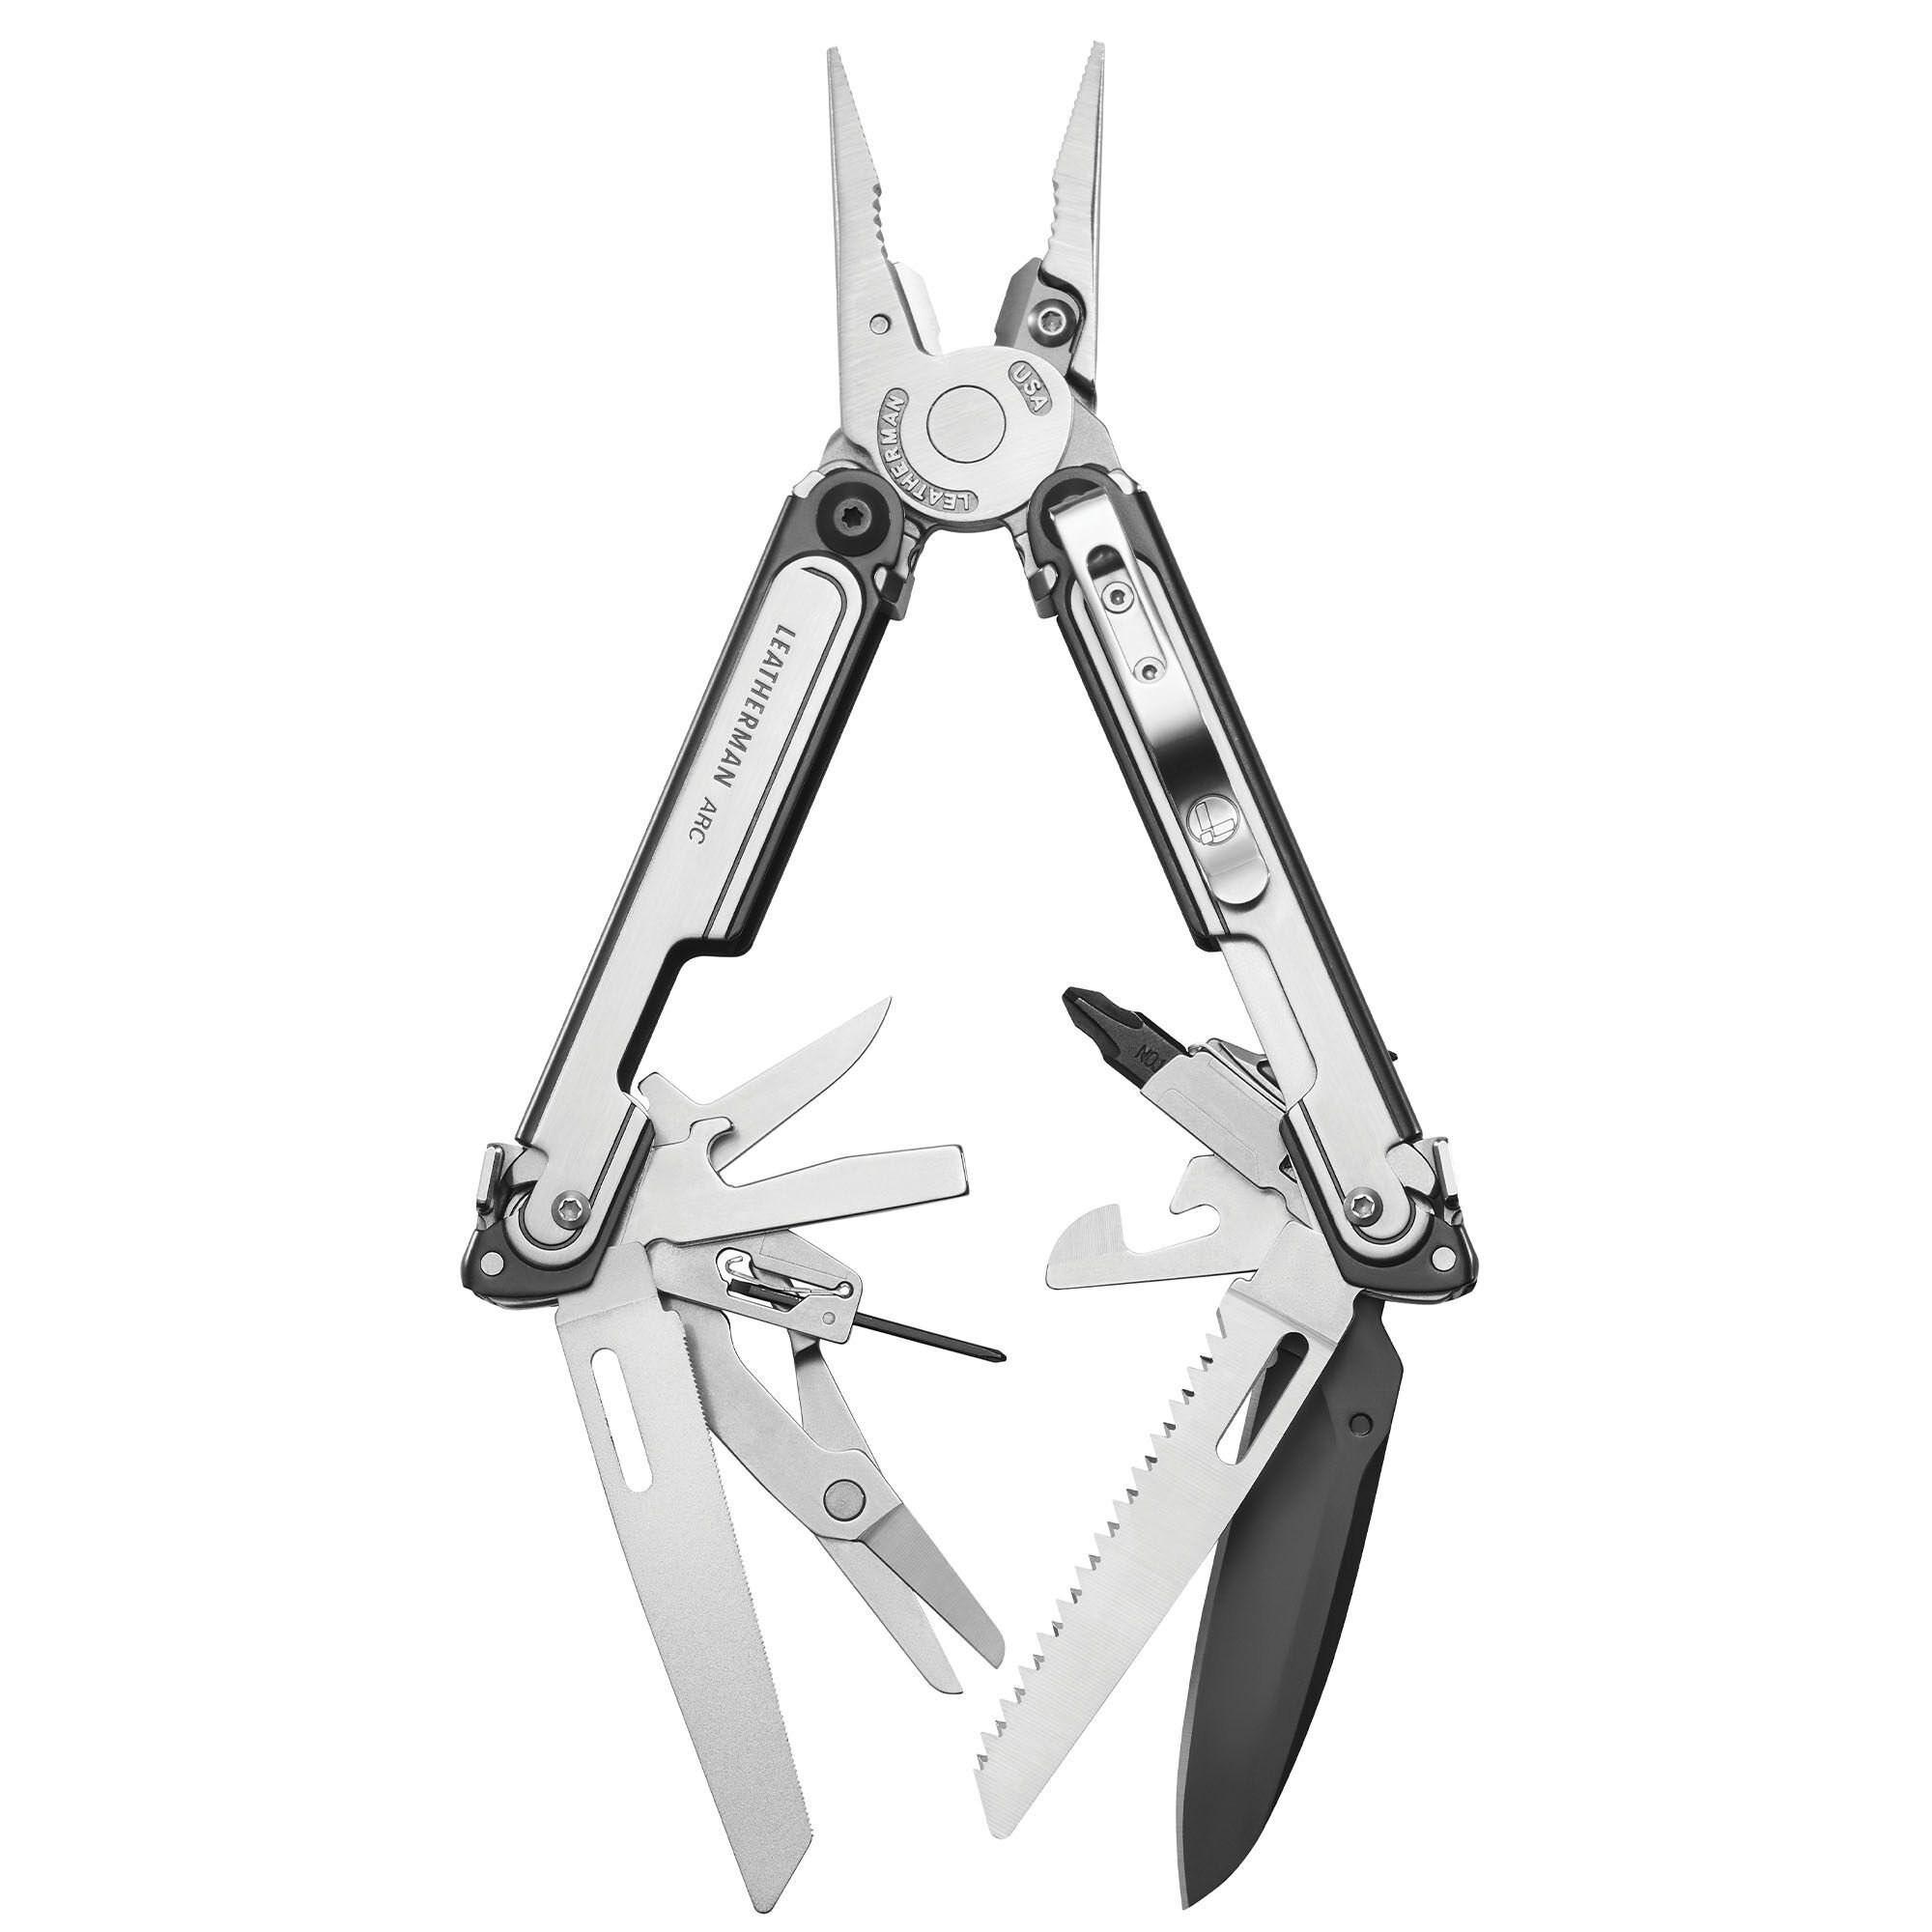 🛠Leatherman ARC with MAGNACUT blade? (real or fake multitool?) SOTM#11 